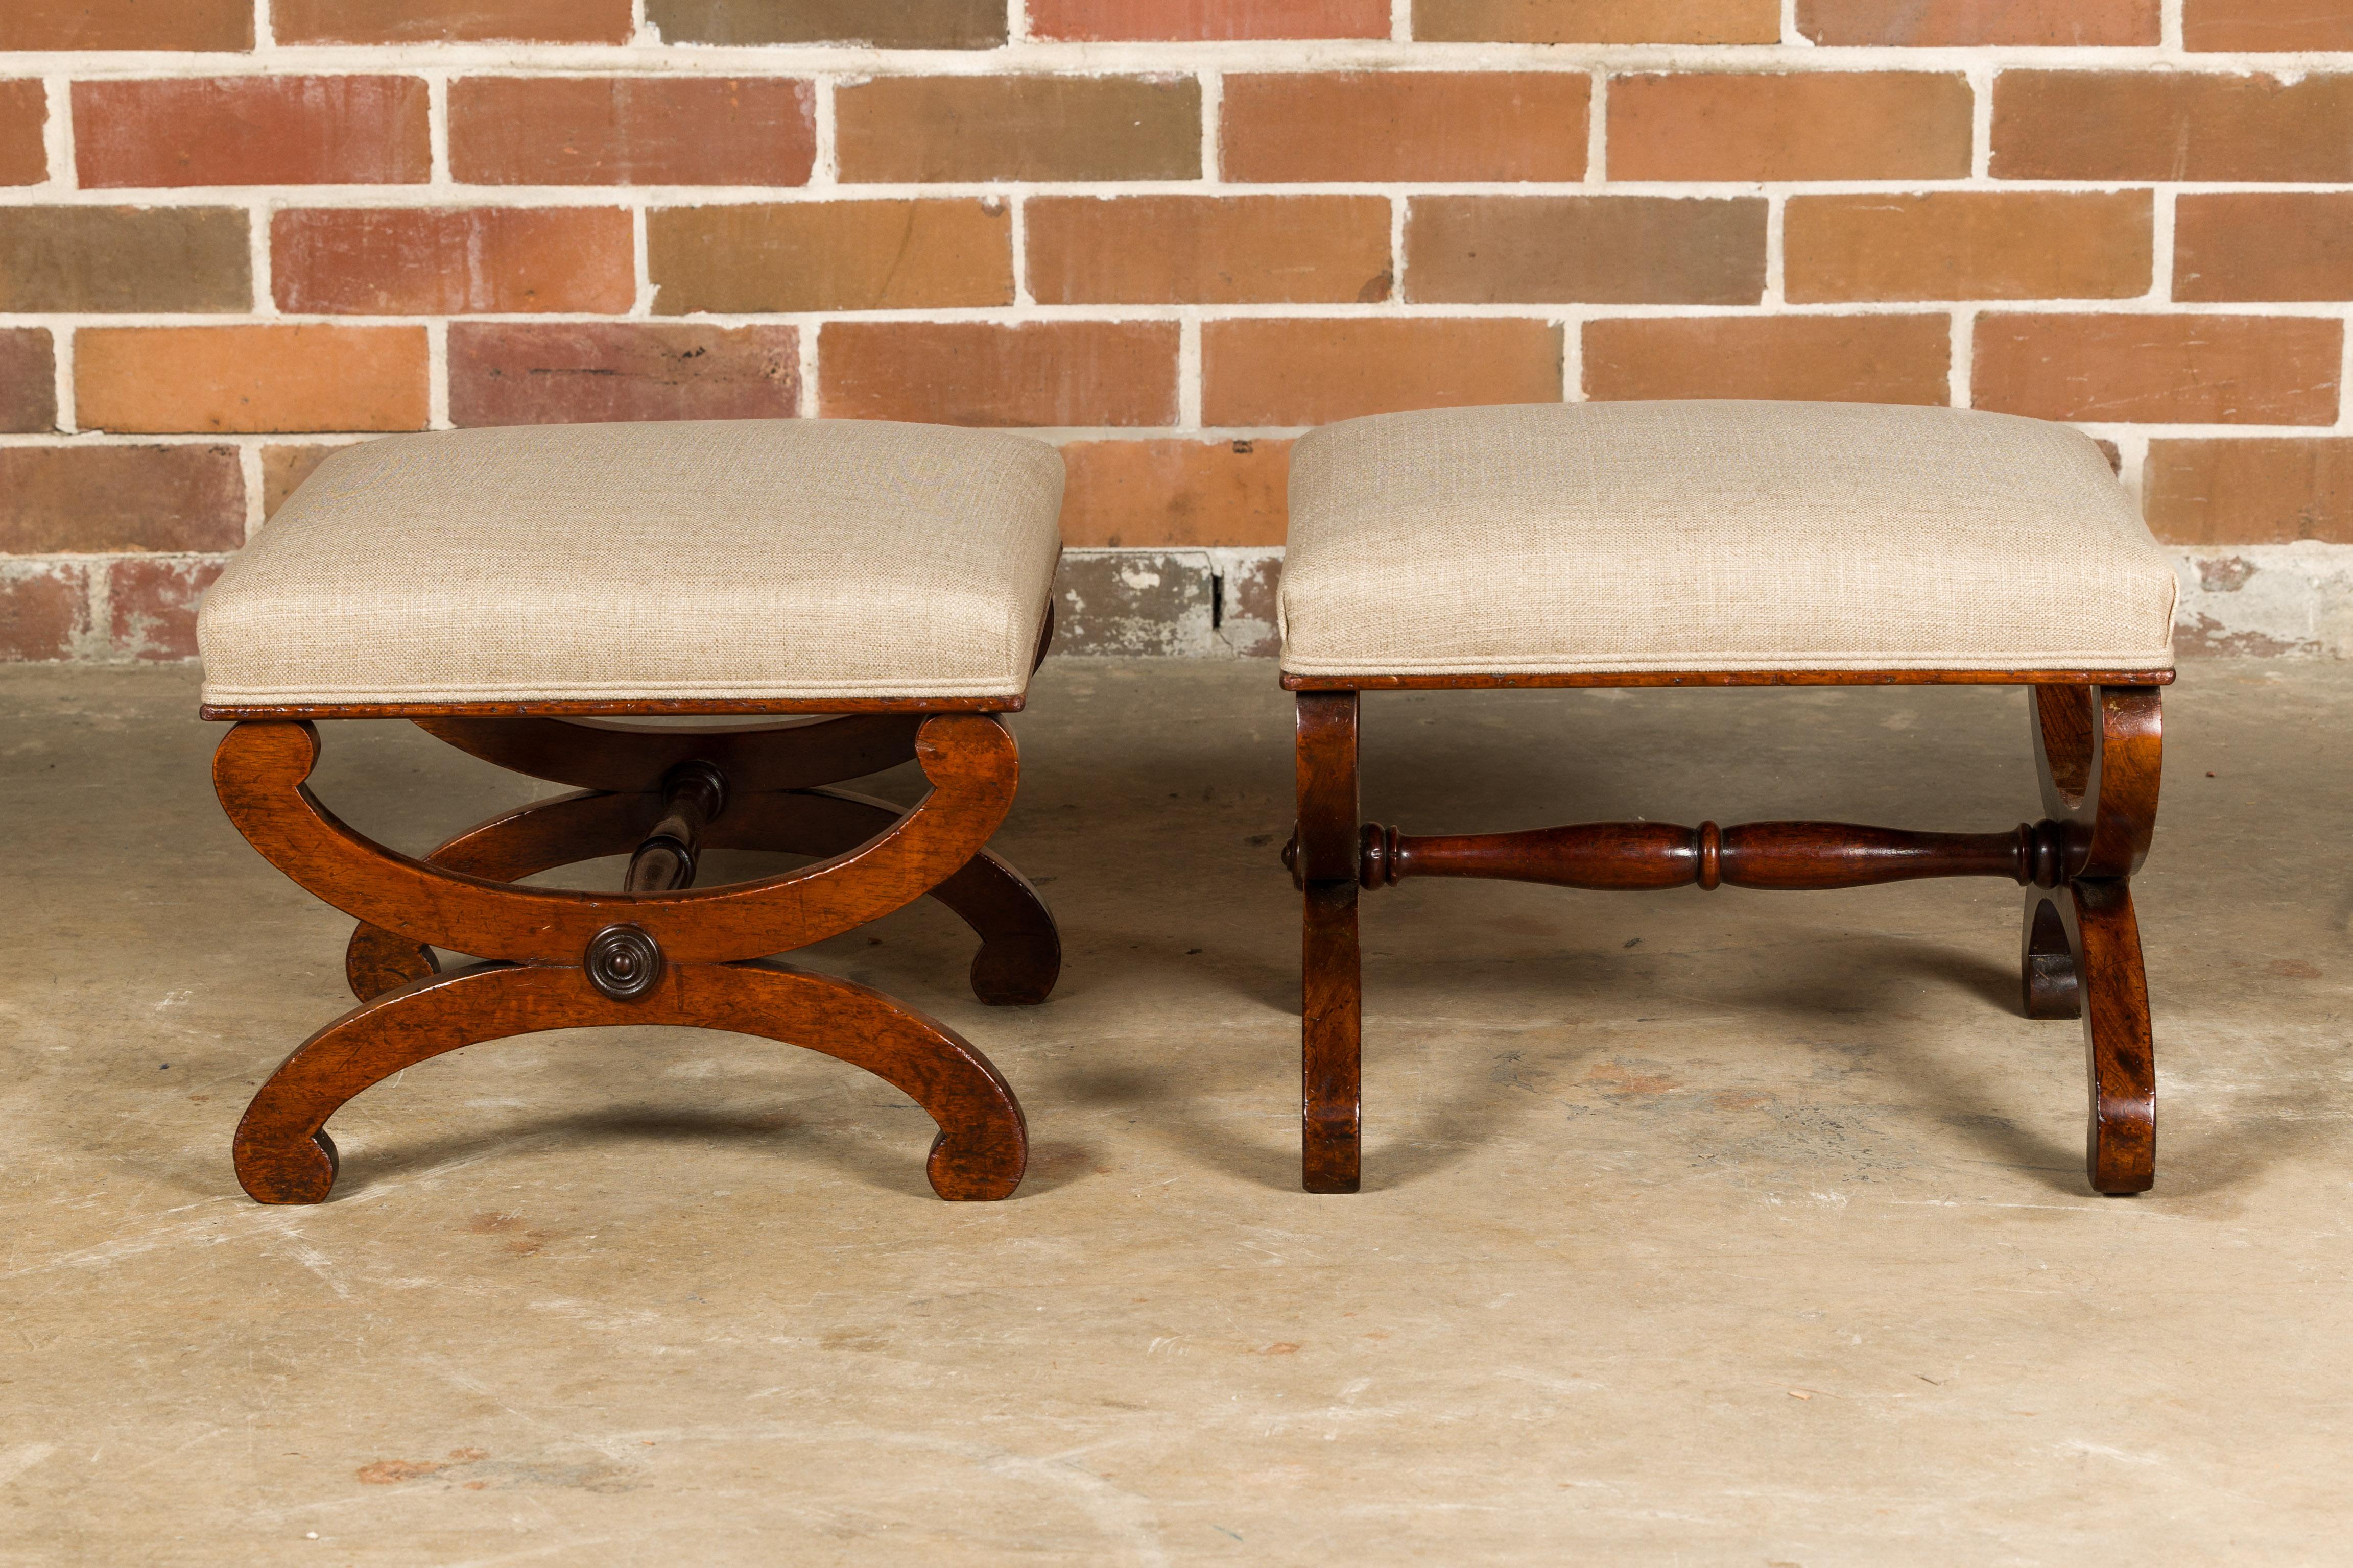 Carved Biedermeier Period 19th Century Walnut Stools with X-Form Bases, a Pair For Sale